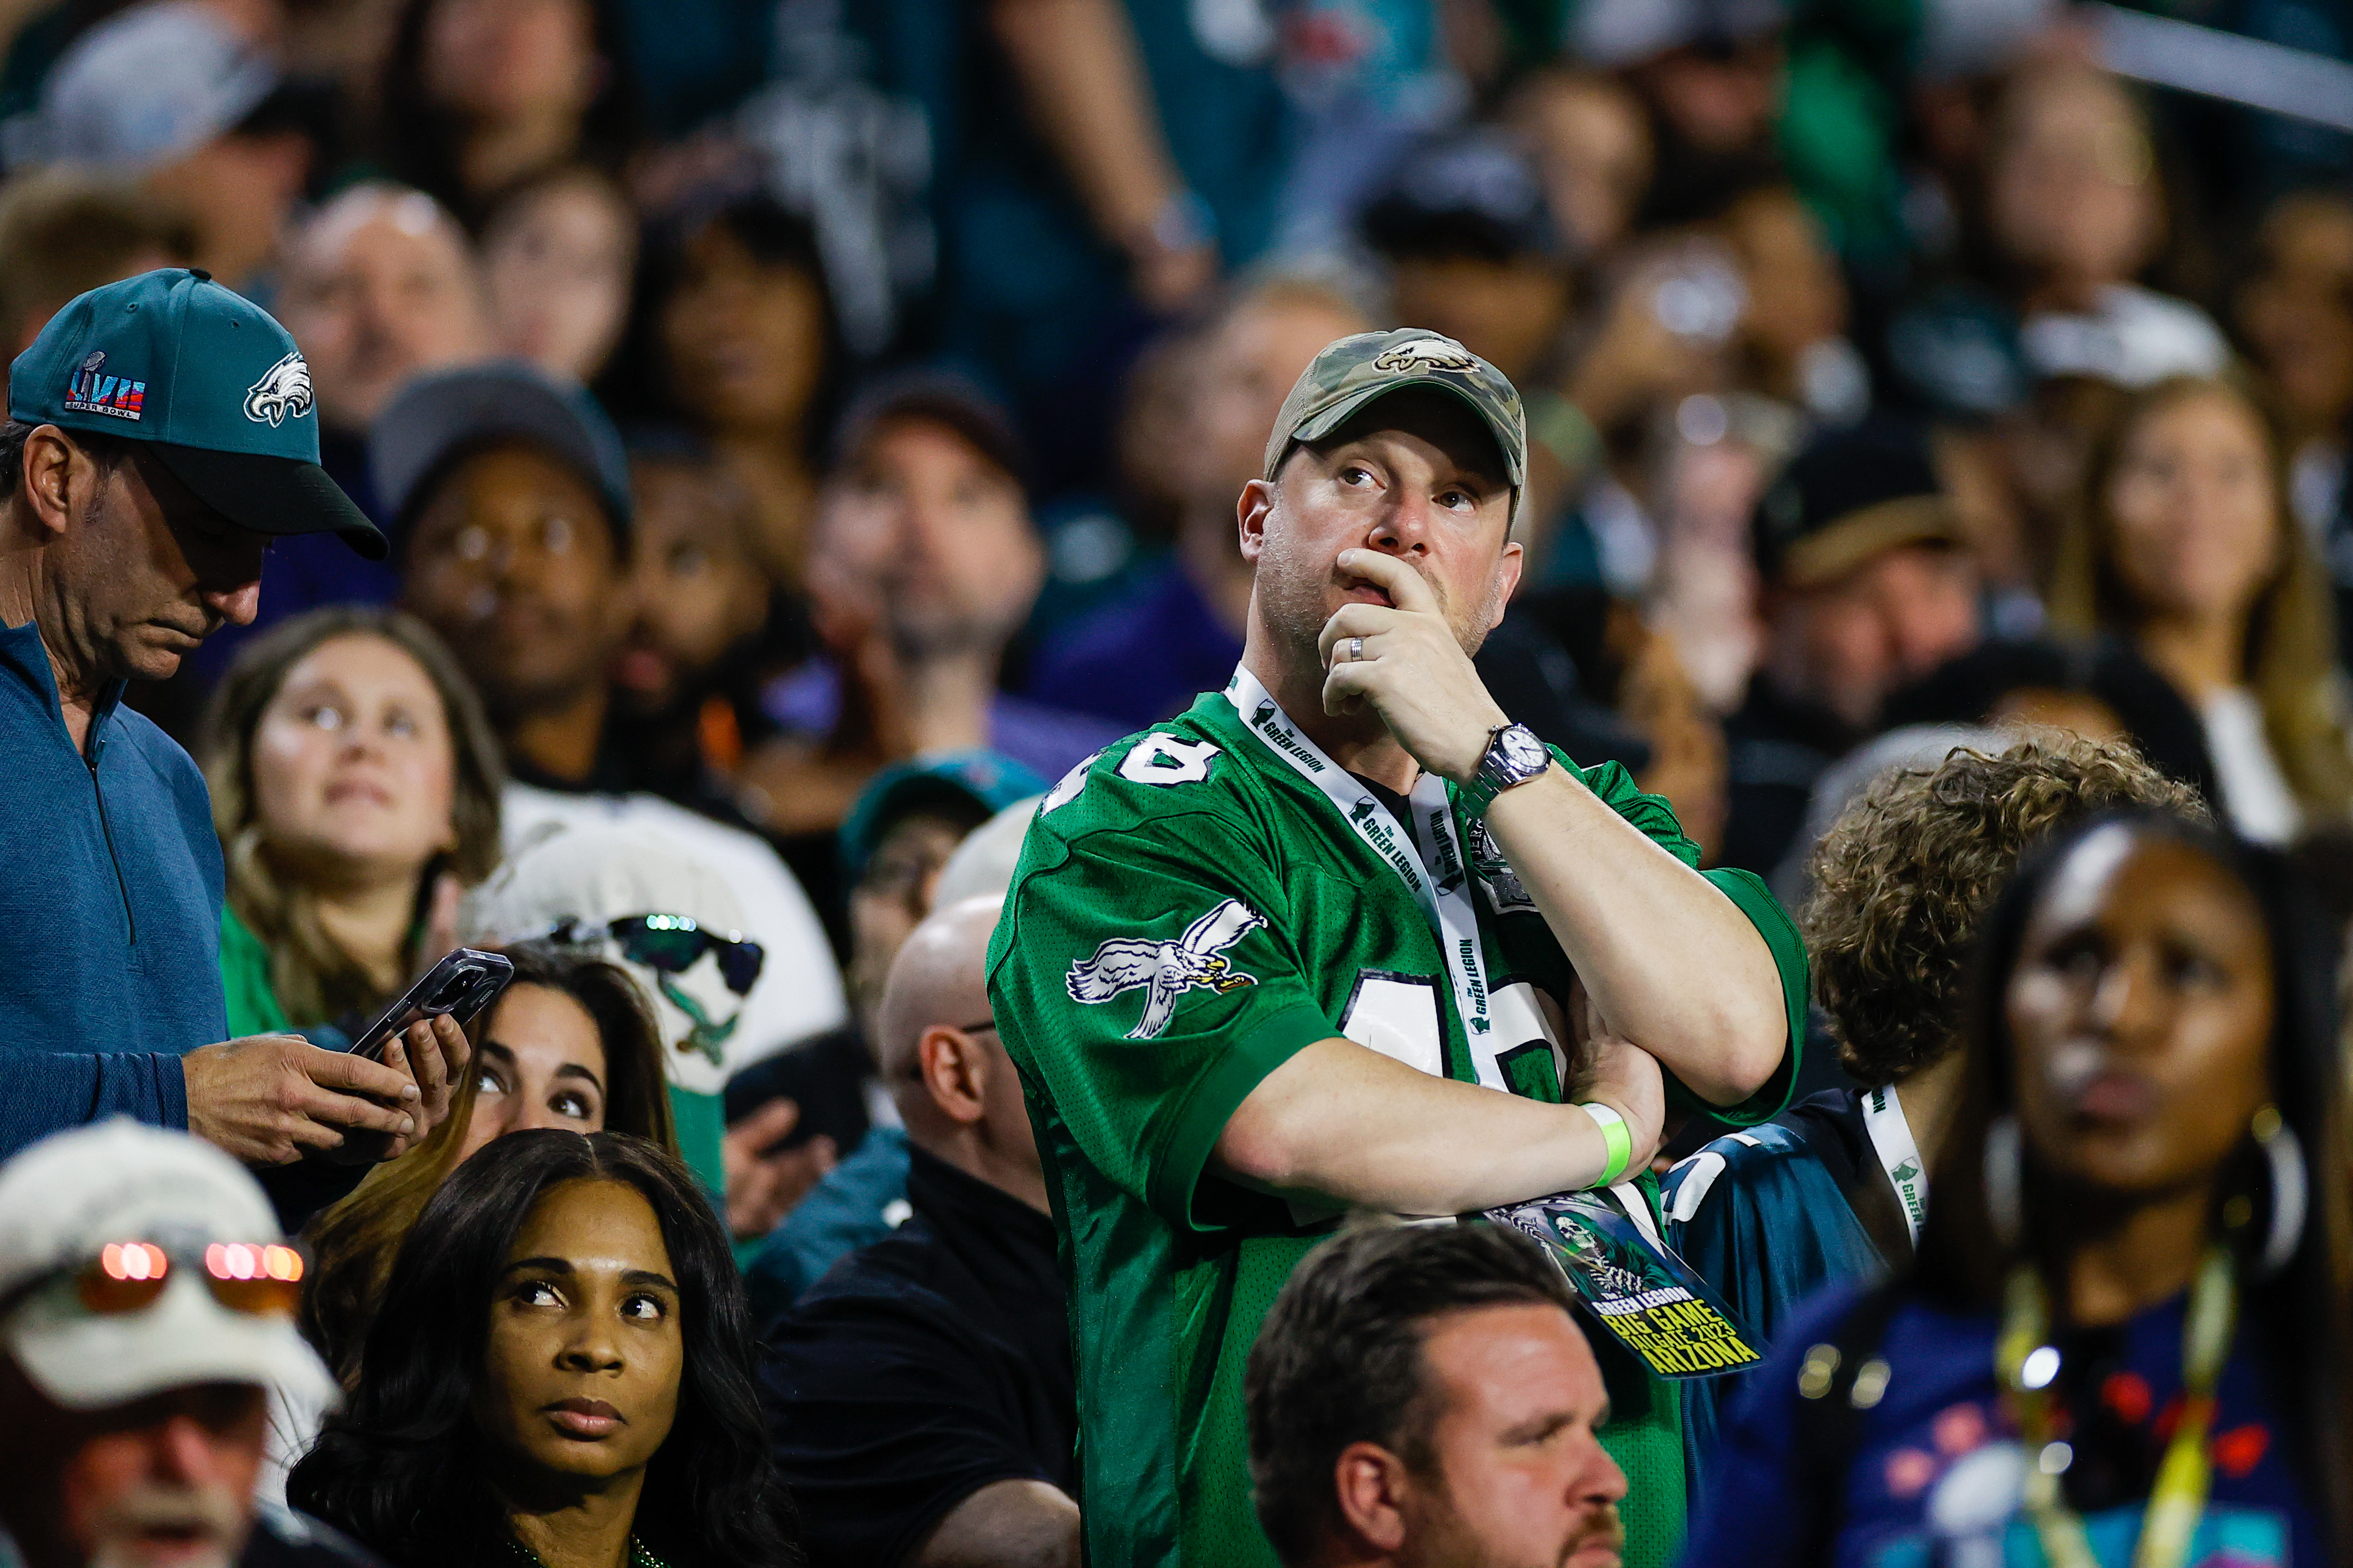 At Super Bowl 2023, Eagles fans in Arizona arrived with smiles and